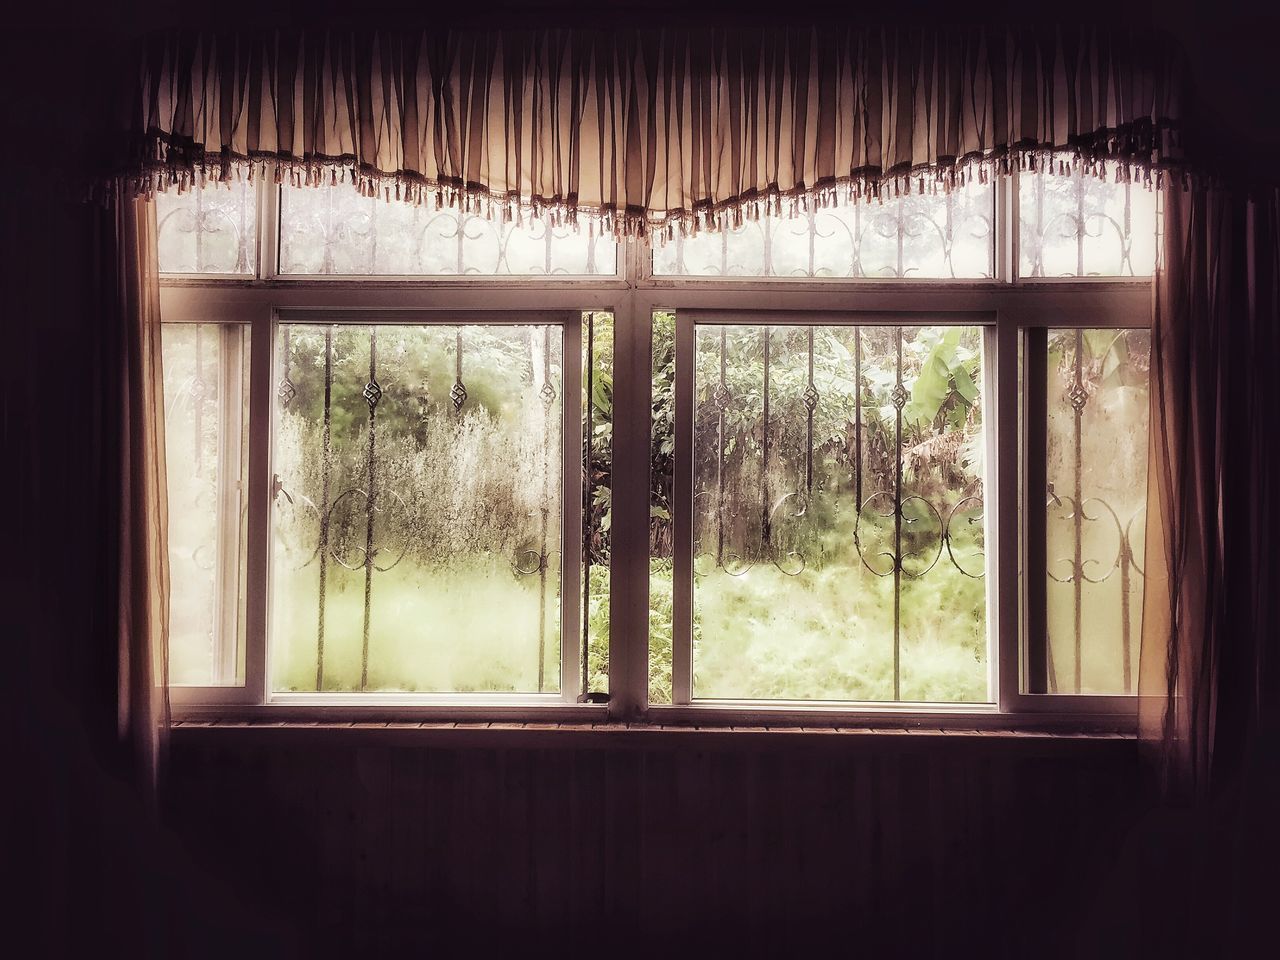 window, indoors, glass - material, transparent, tree, house, curtain, looking through window, glass, growth, window frame, day, home interior, closed, no people, open, field, nature, window sill, green color